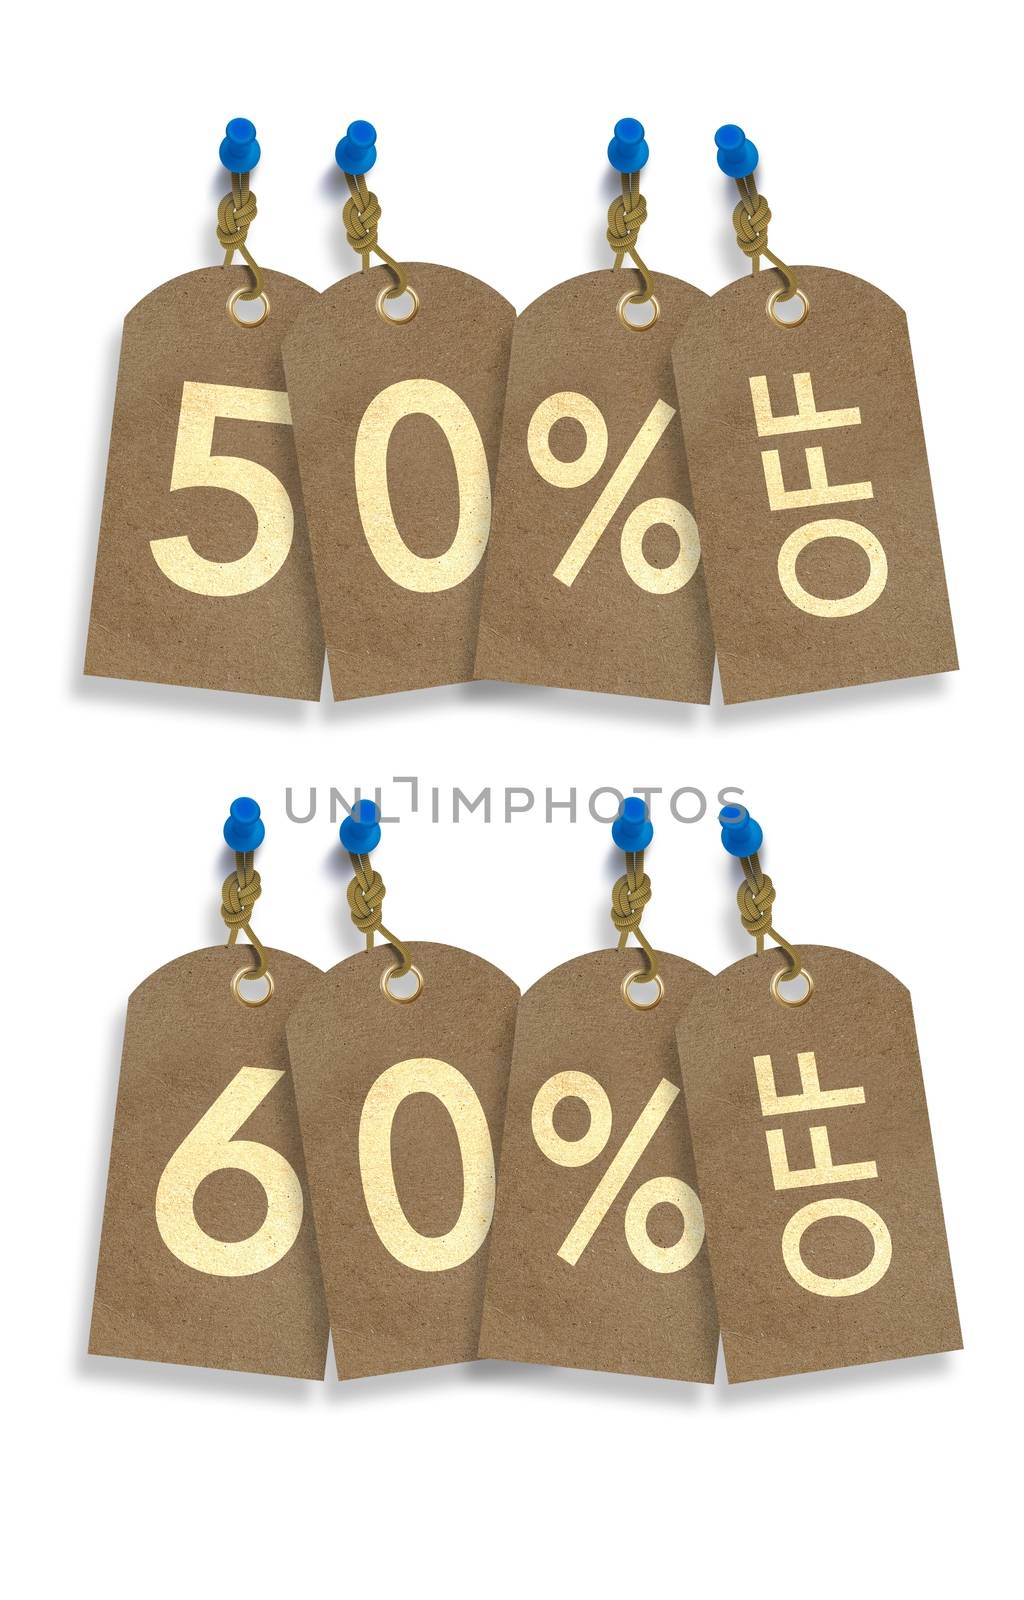 50% and 60% Off Paper Discount Tags Isolated on White.